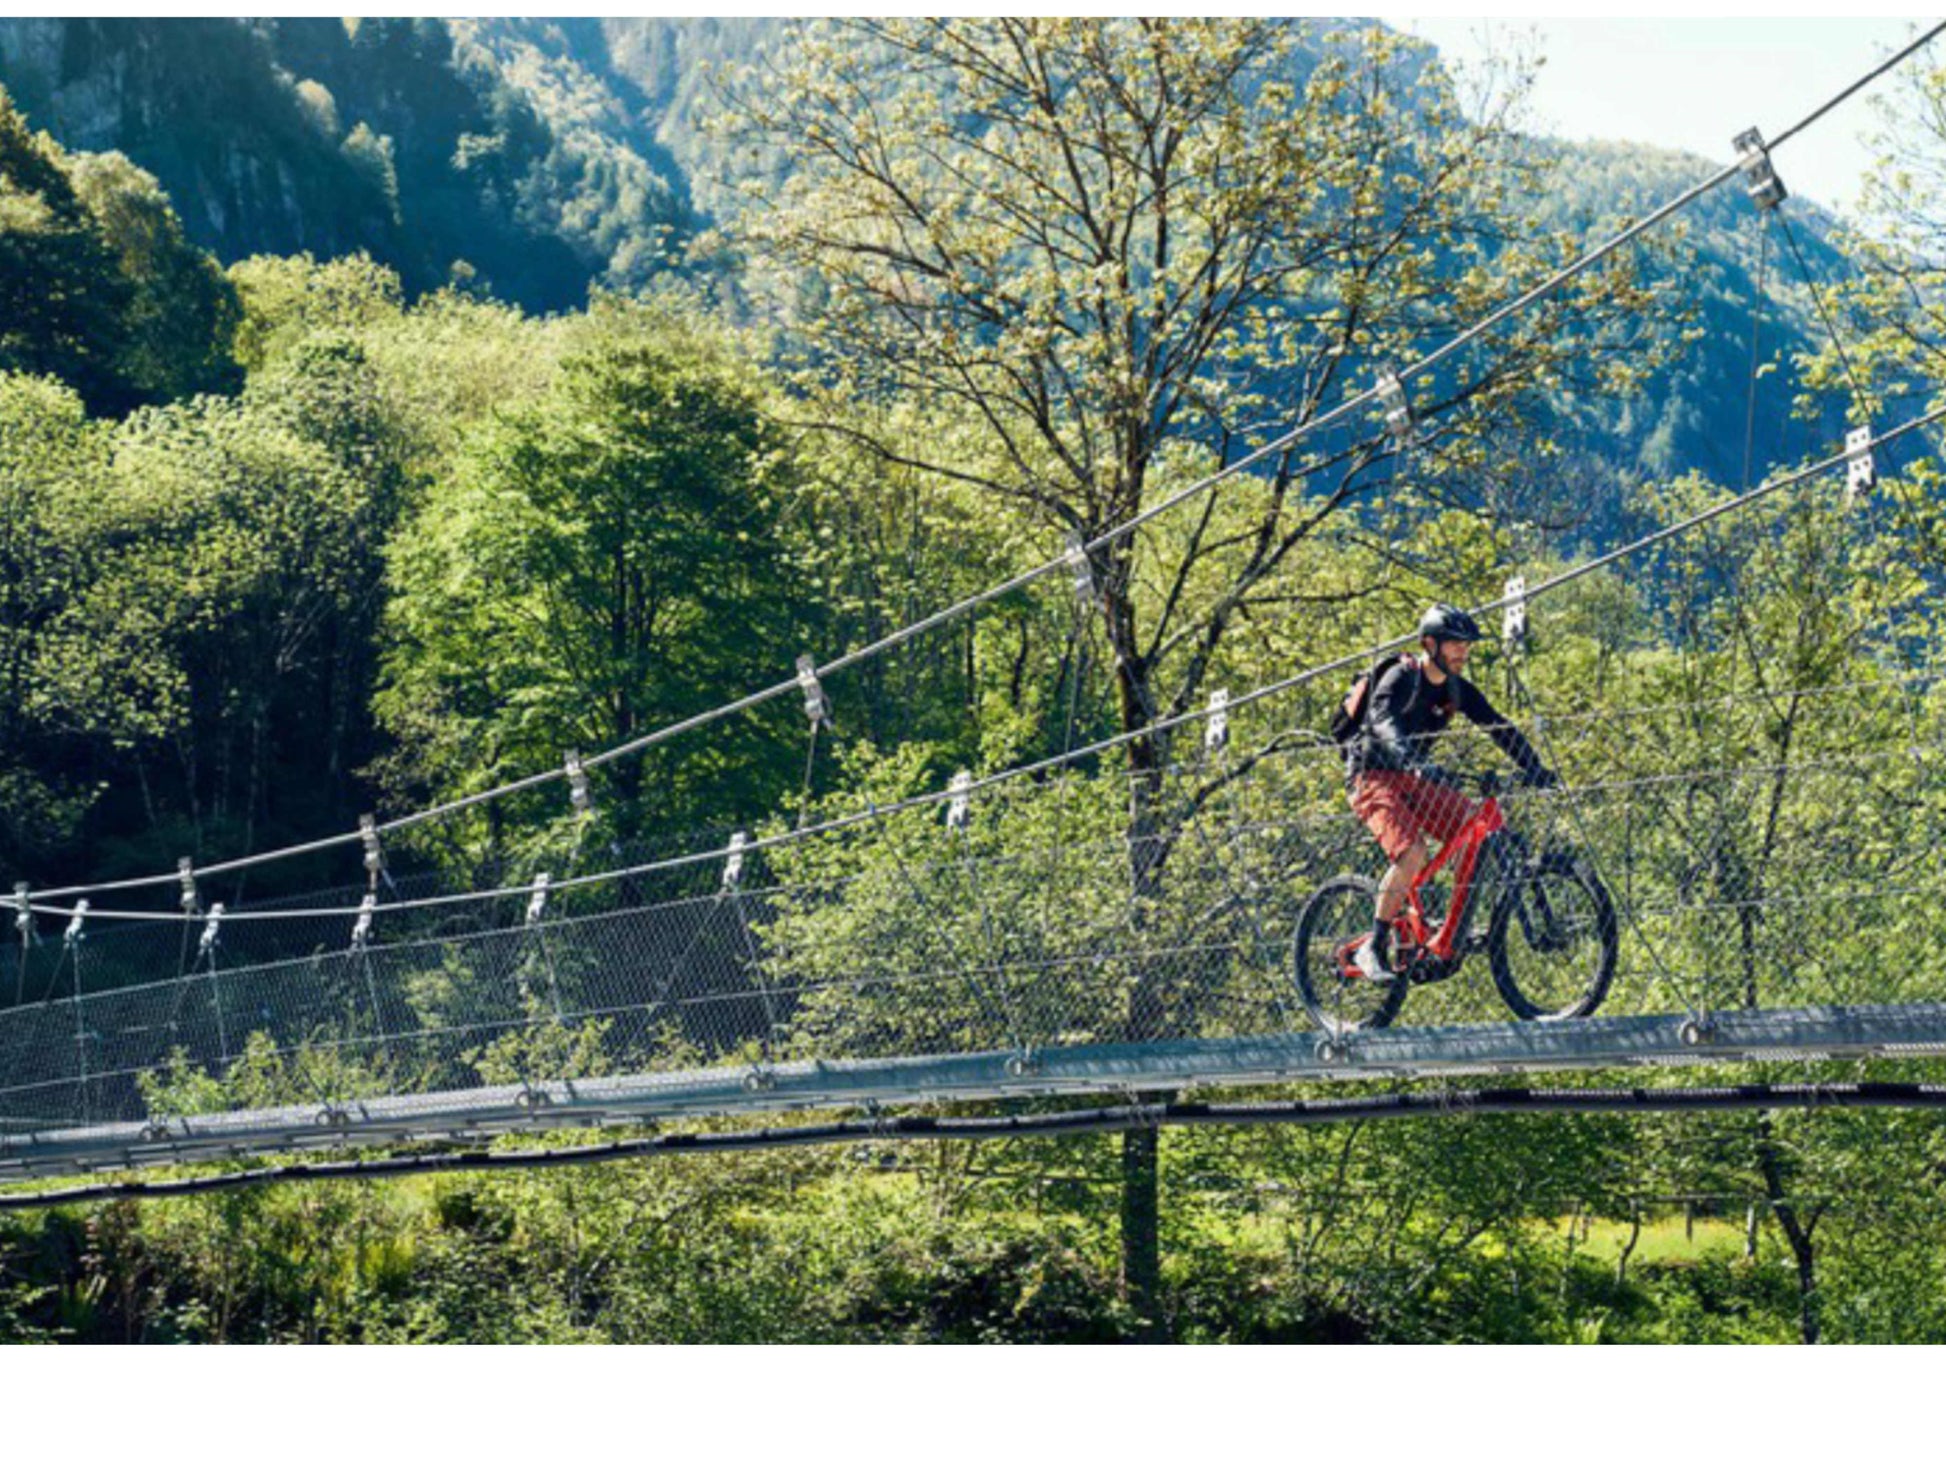 Riese and Muller Delite Mountain Touring eMTB full suspension man riding across old wooden bridge